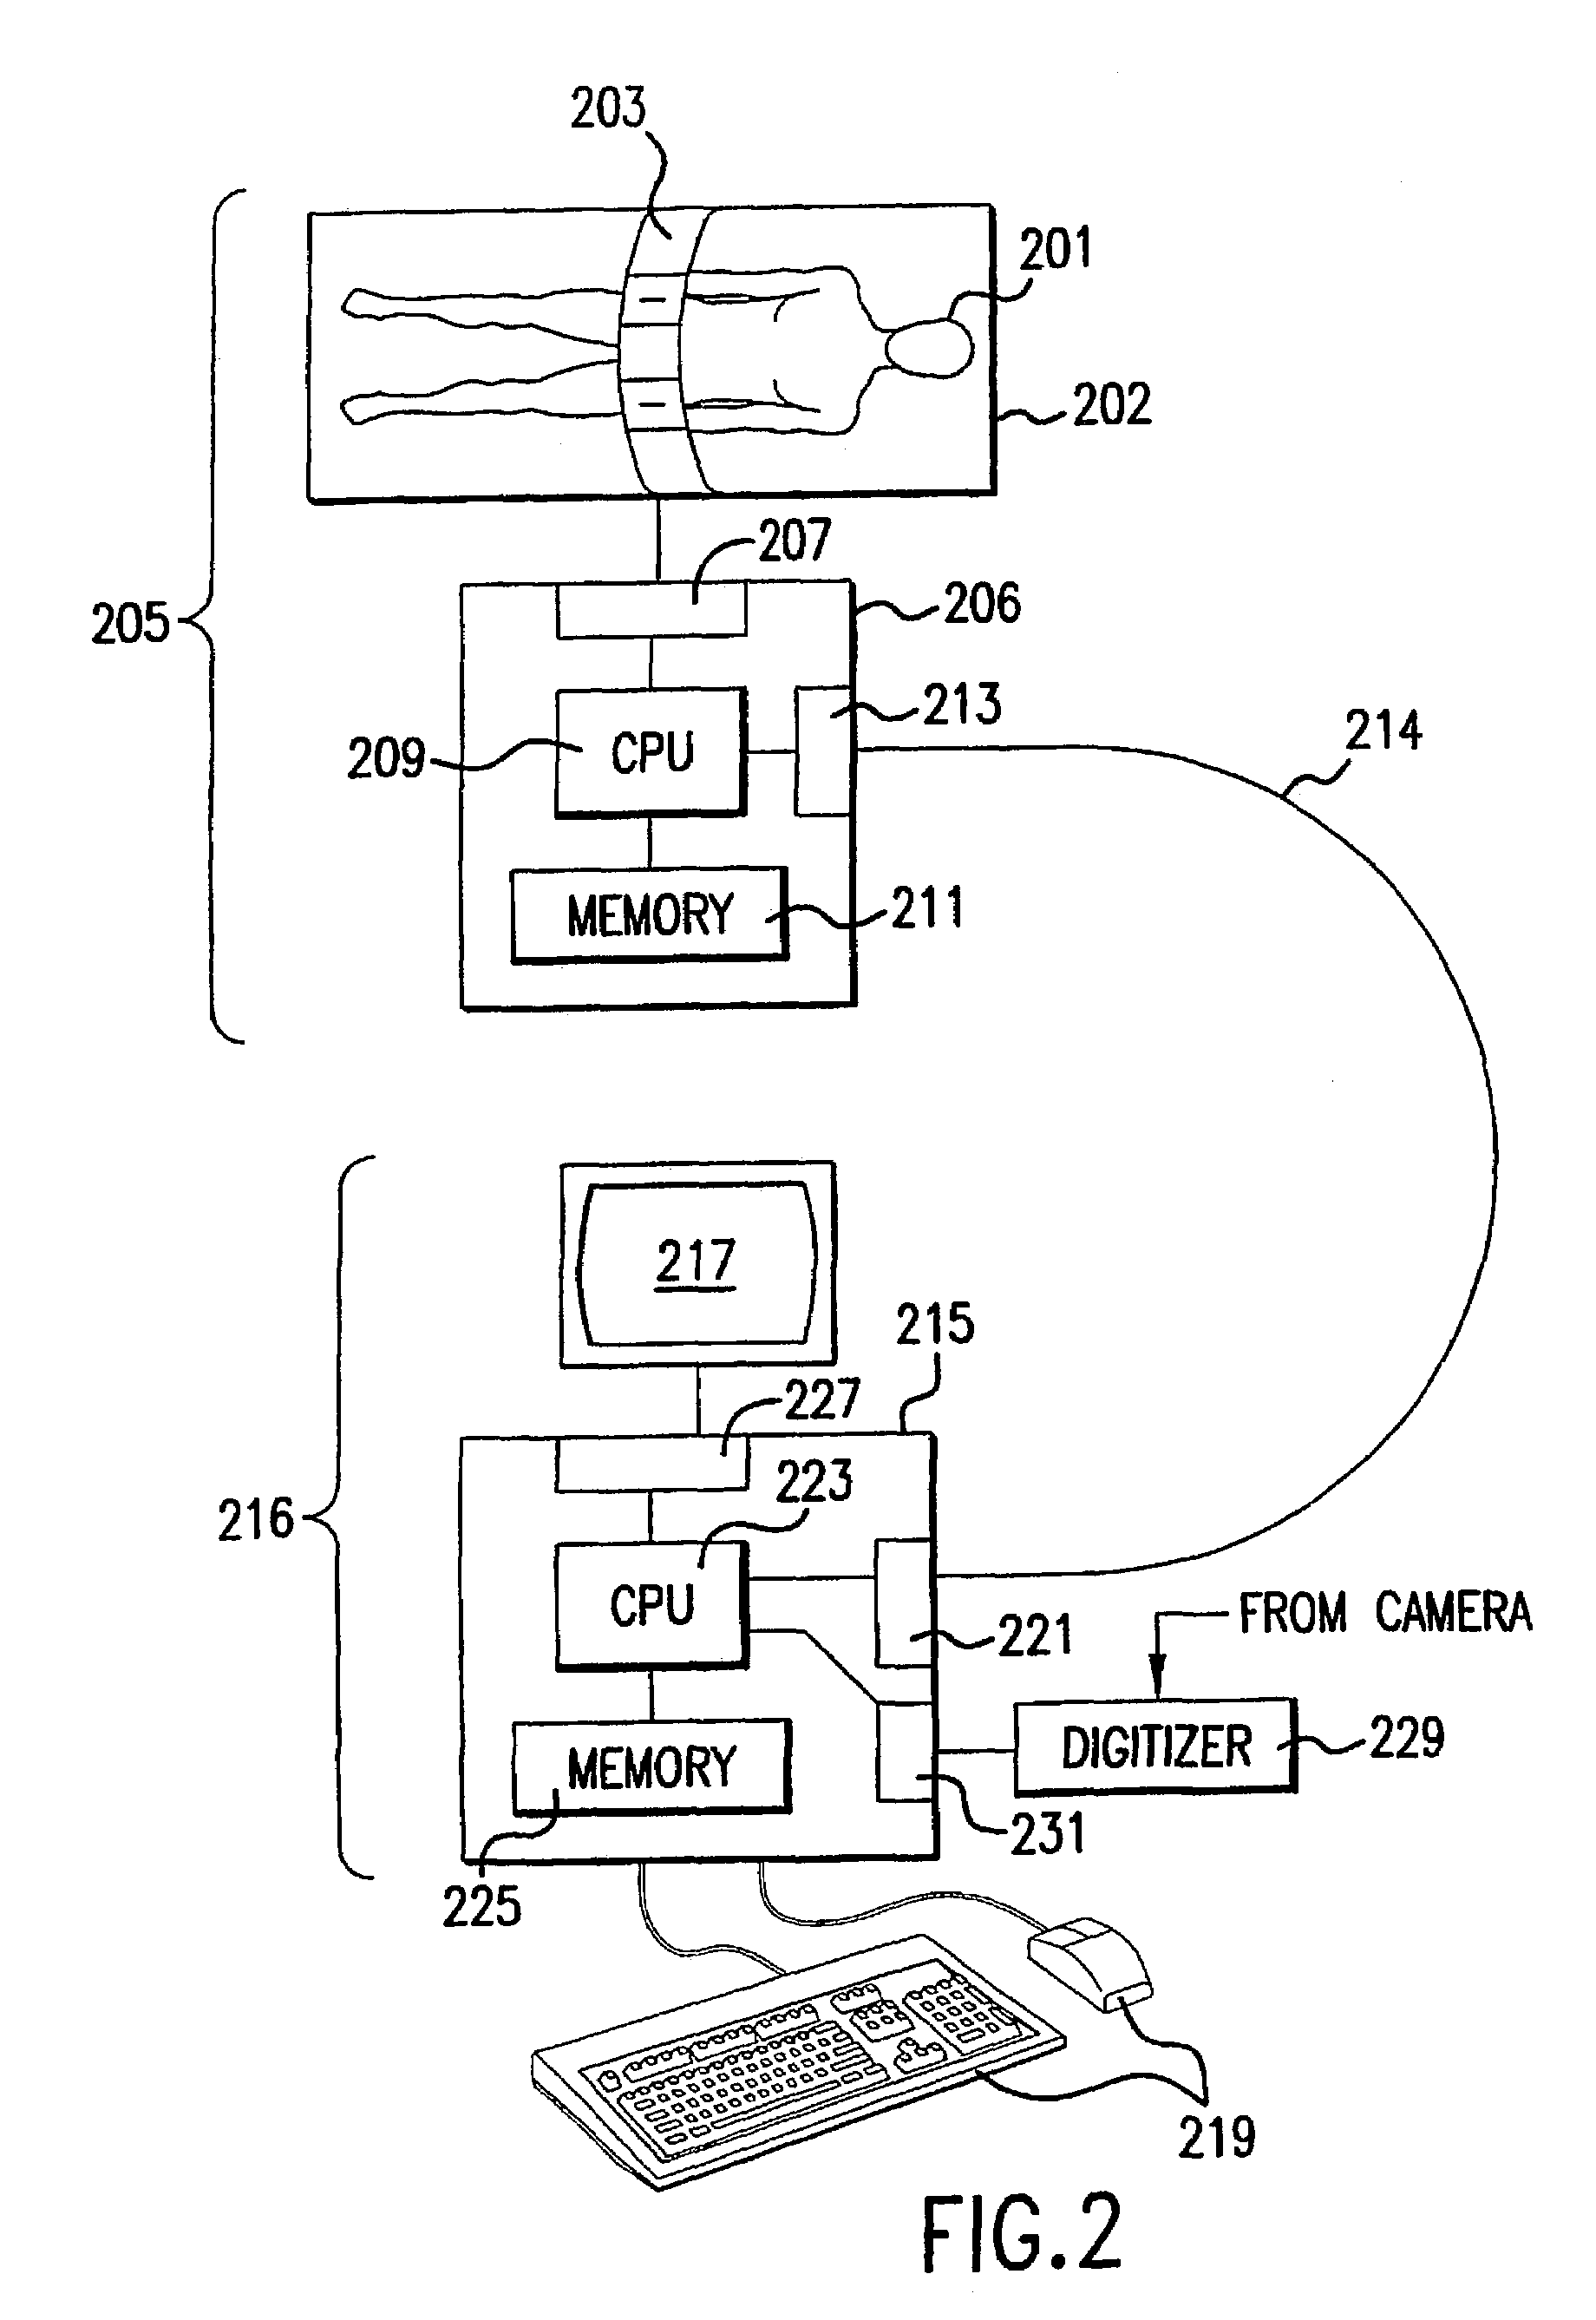 Computer aided treatment planning and visualization with image registration and fusion